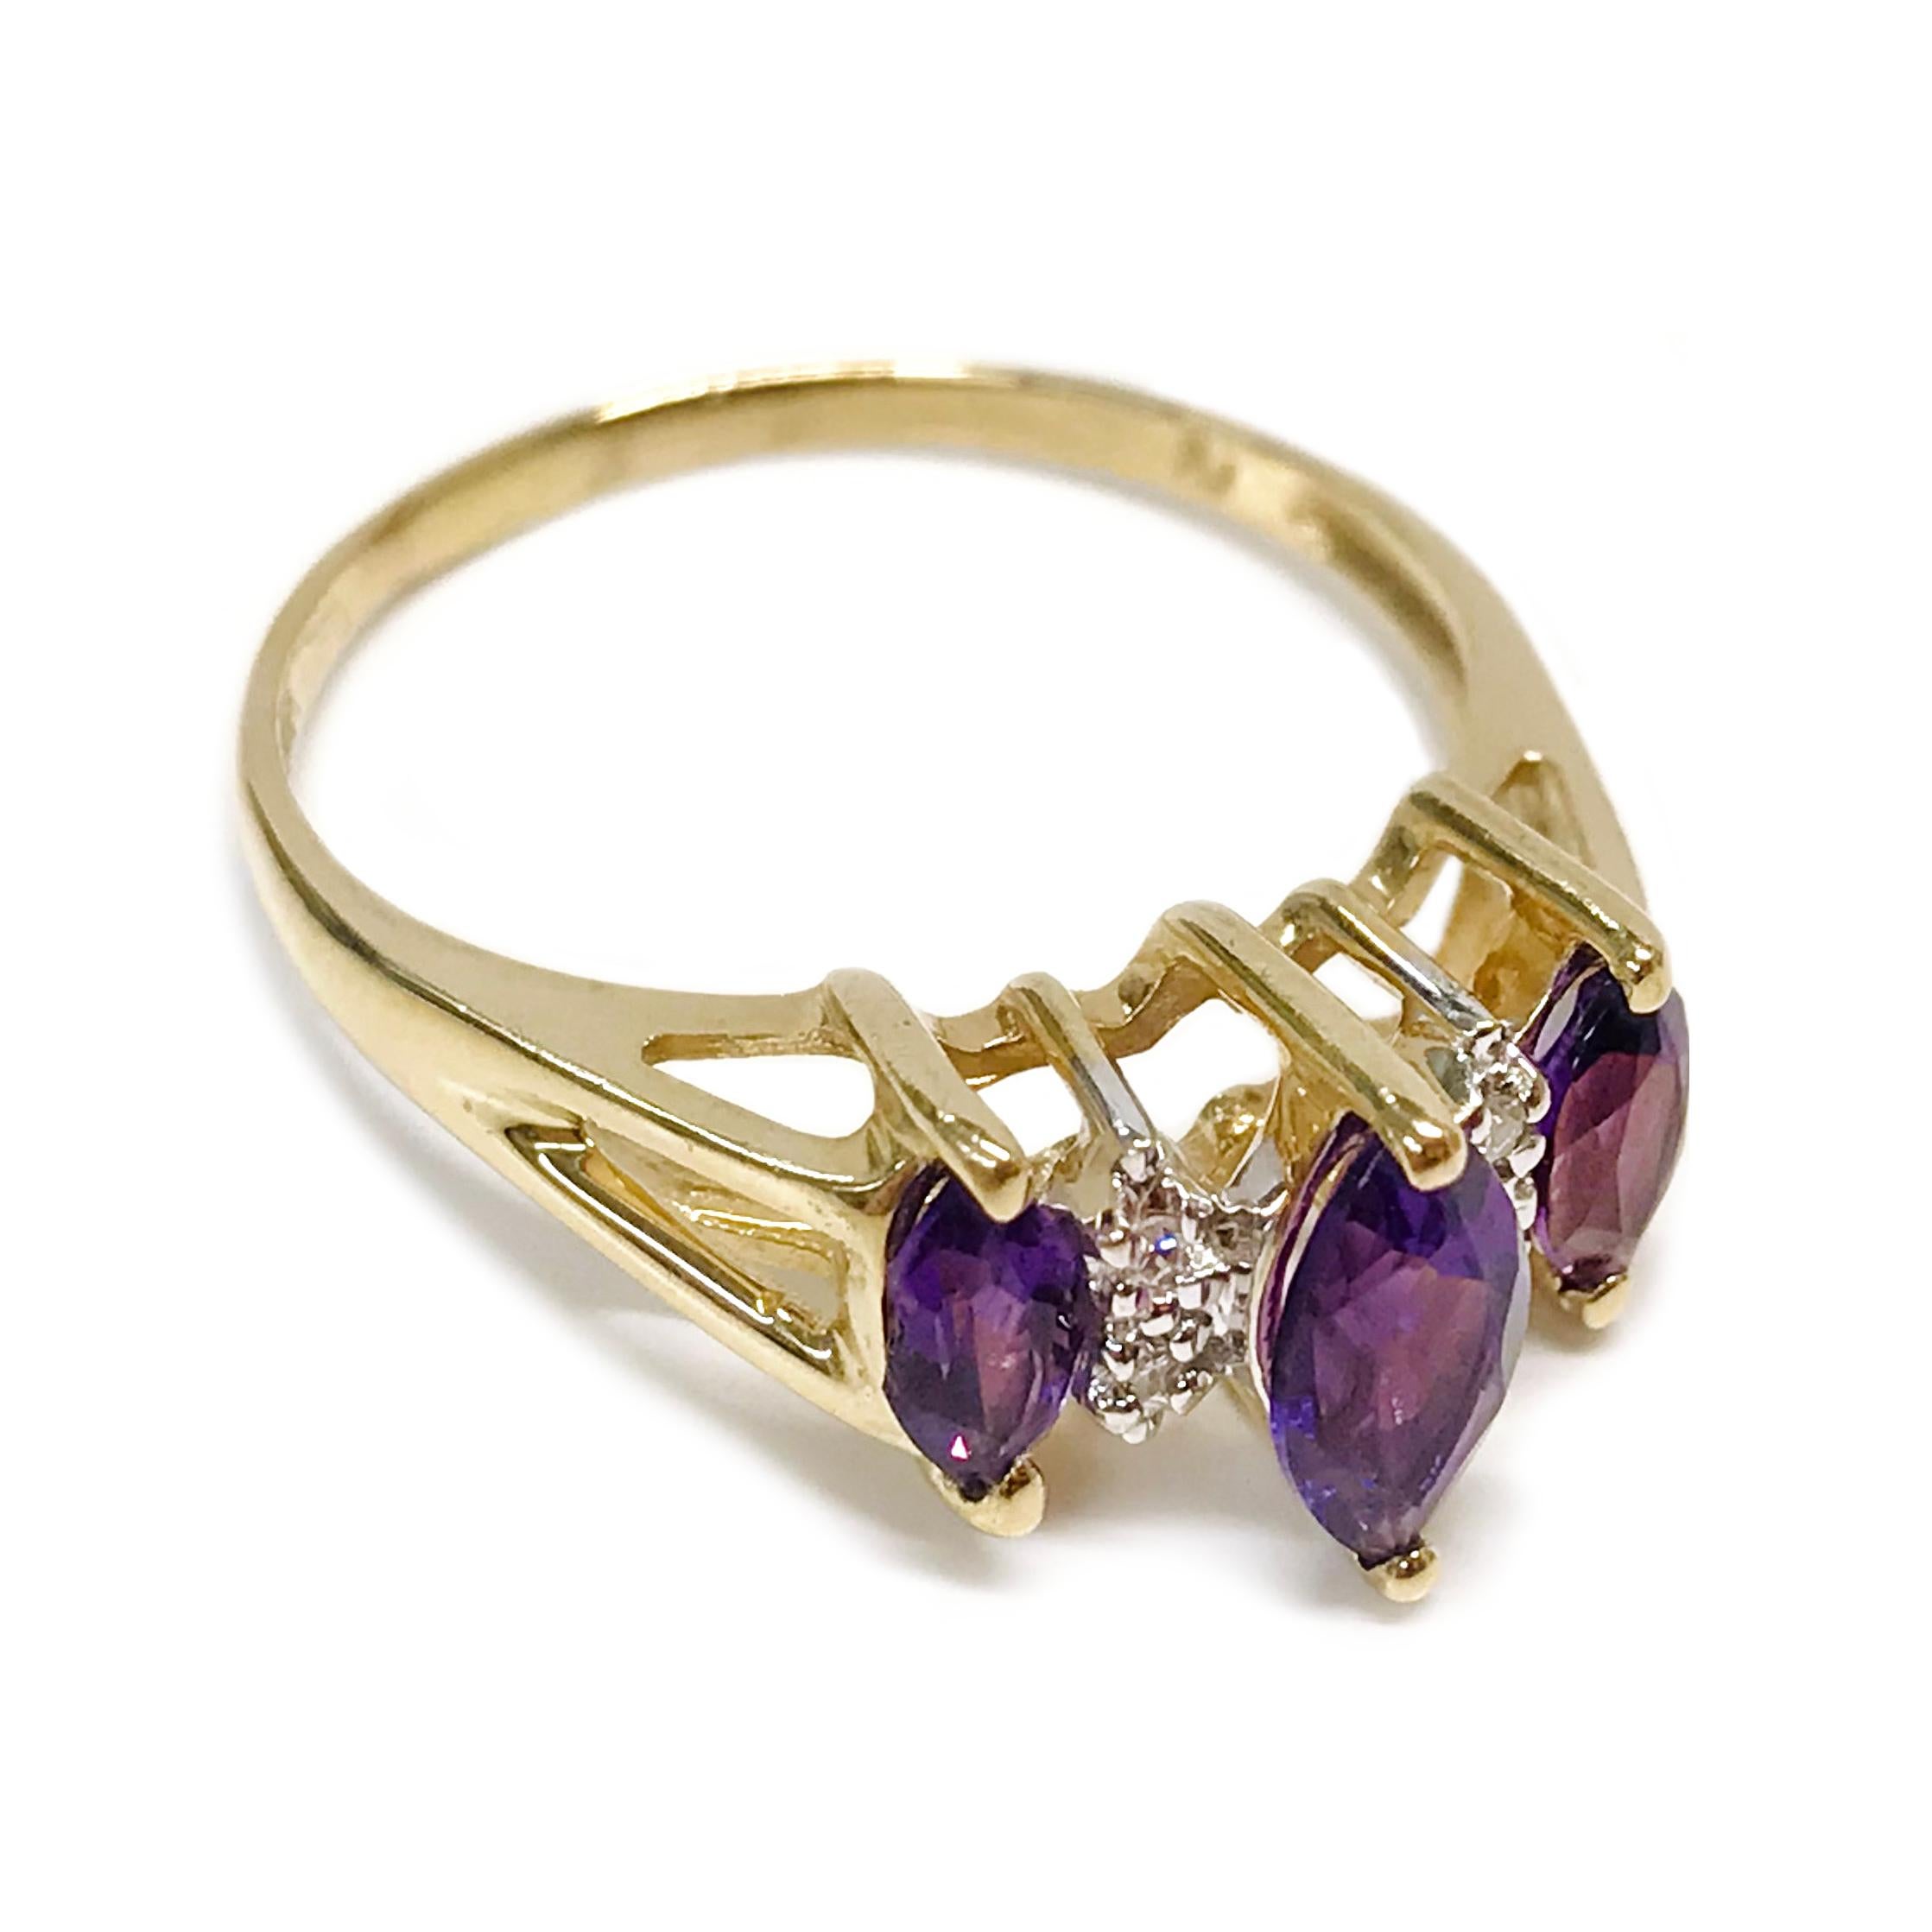 14 Karat Yellow Gold Amethyst Diamond Ring. The ring features three prong-set marquise Amethyst gemstones and four round diamonds. The split band ring is size 8. The center Amethyst measures 7mm x 3.5mm, the two smaller Amethysts measure 4mm x